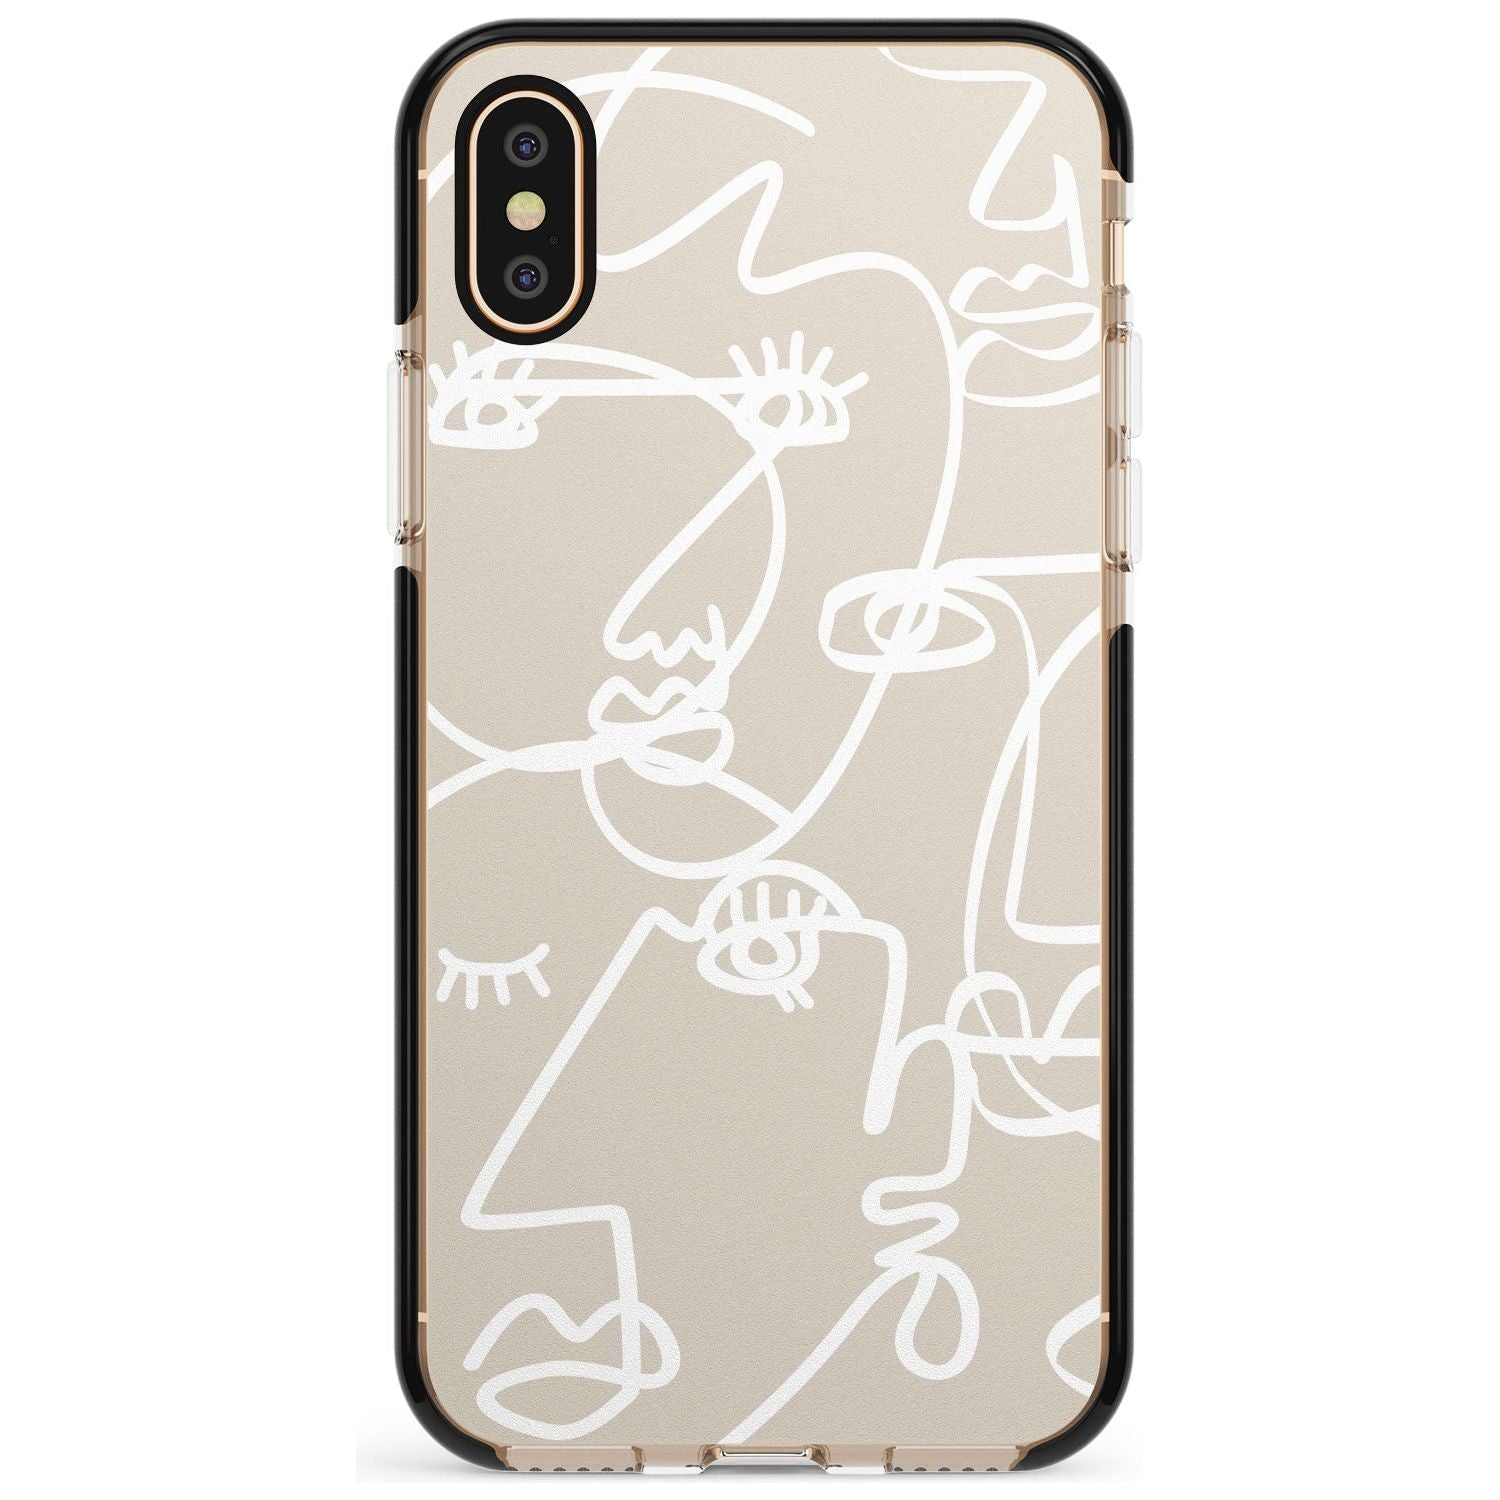 Continuous Line Faces: White on Beige Pink Fade Impact Phone Case for iPhone X XS Max XR